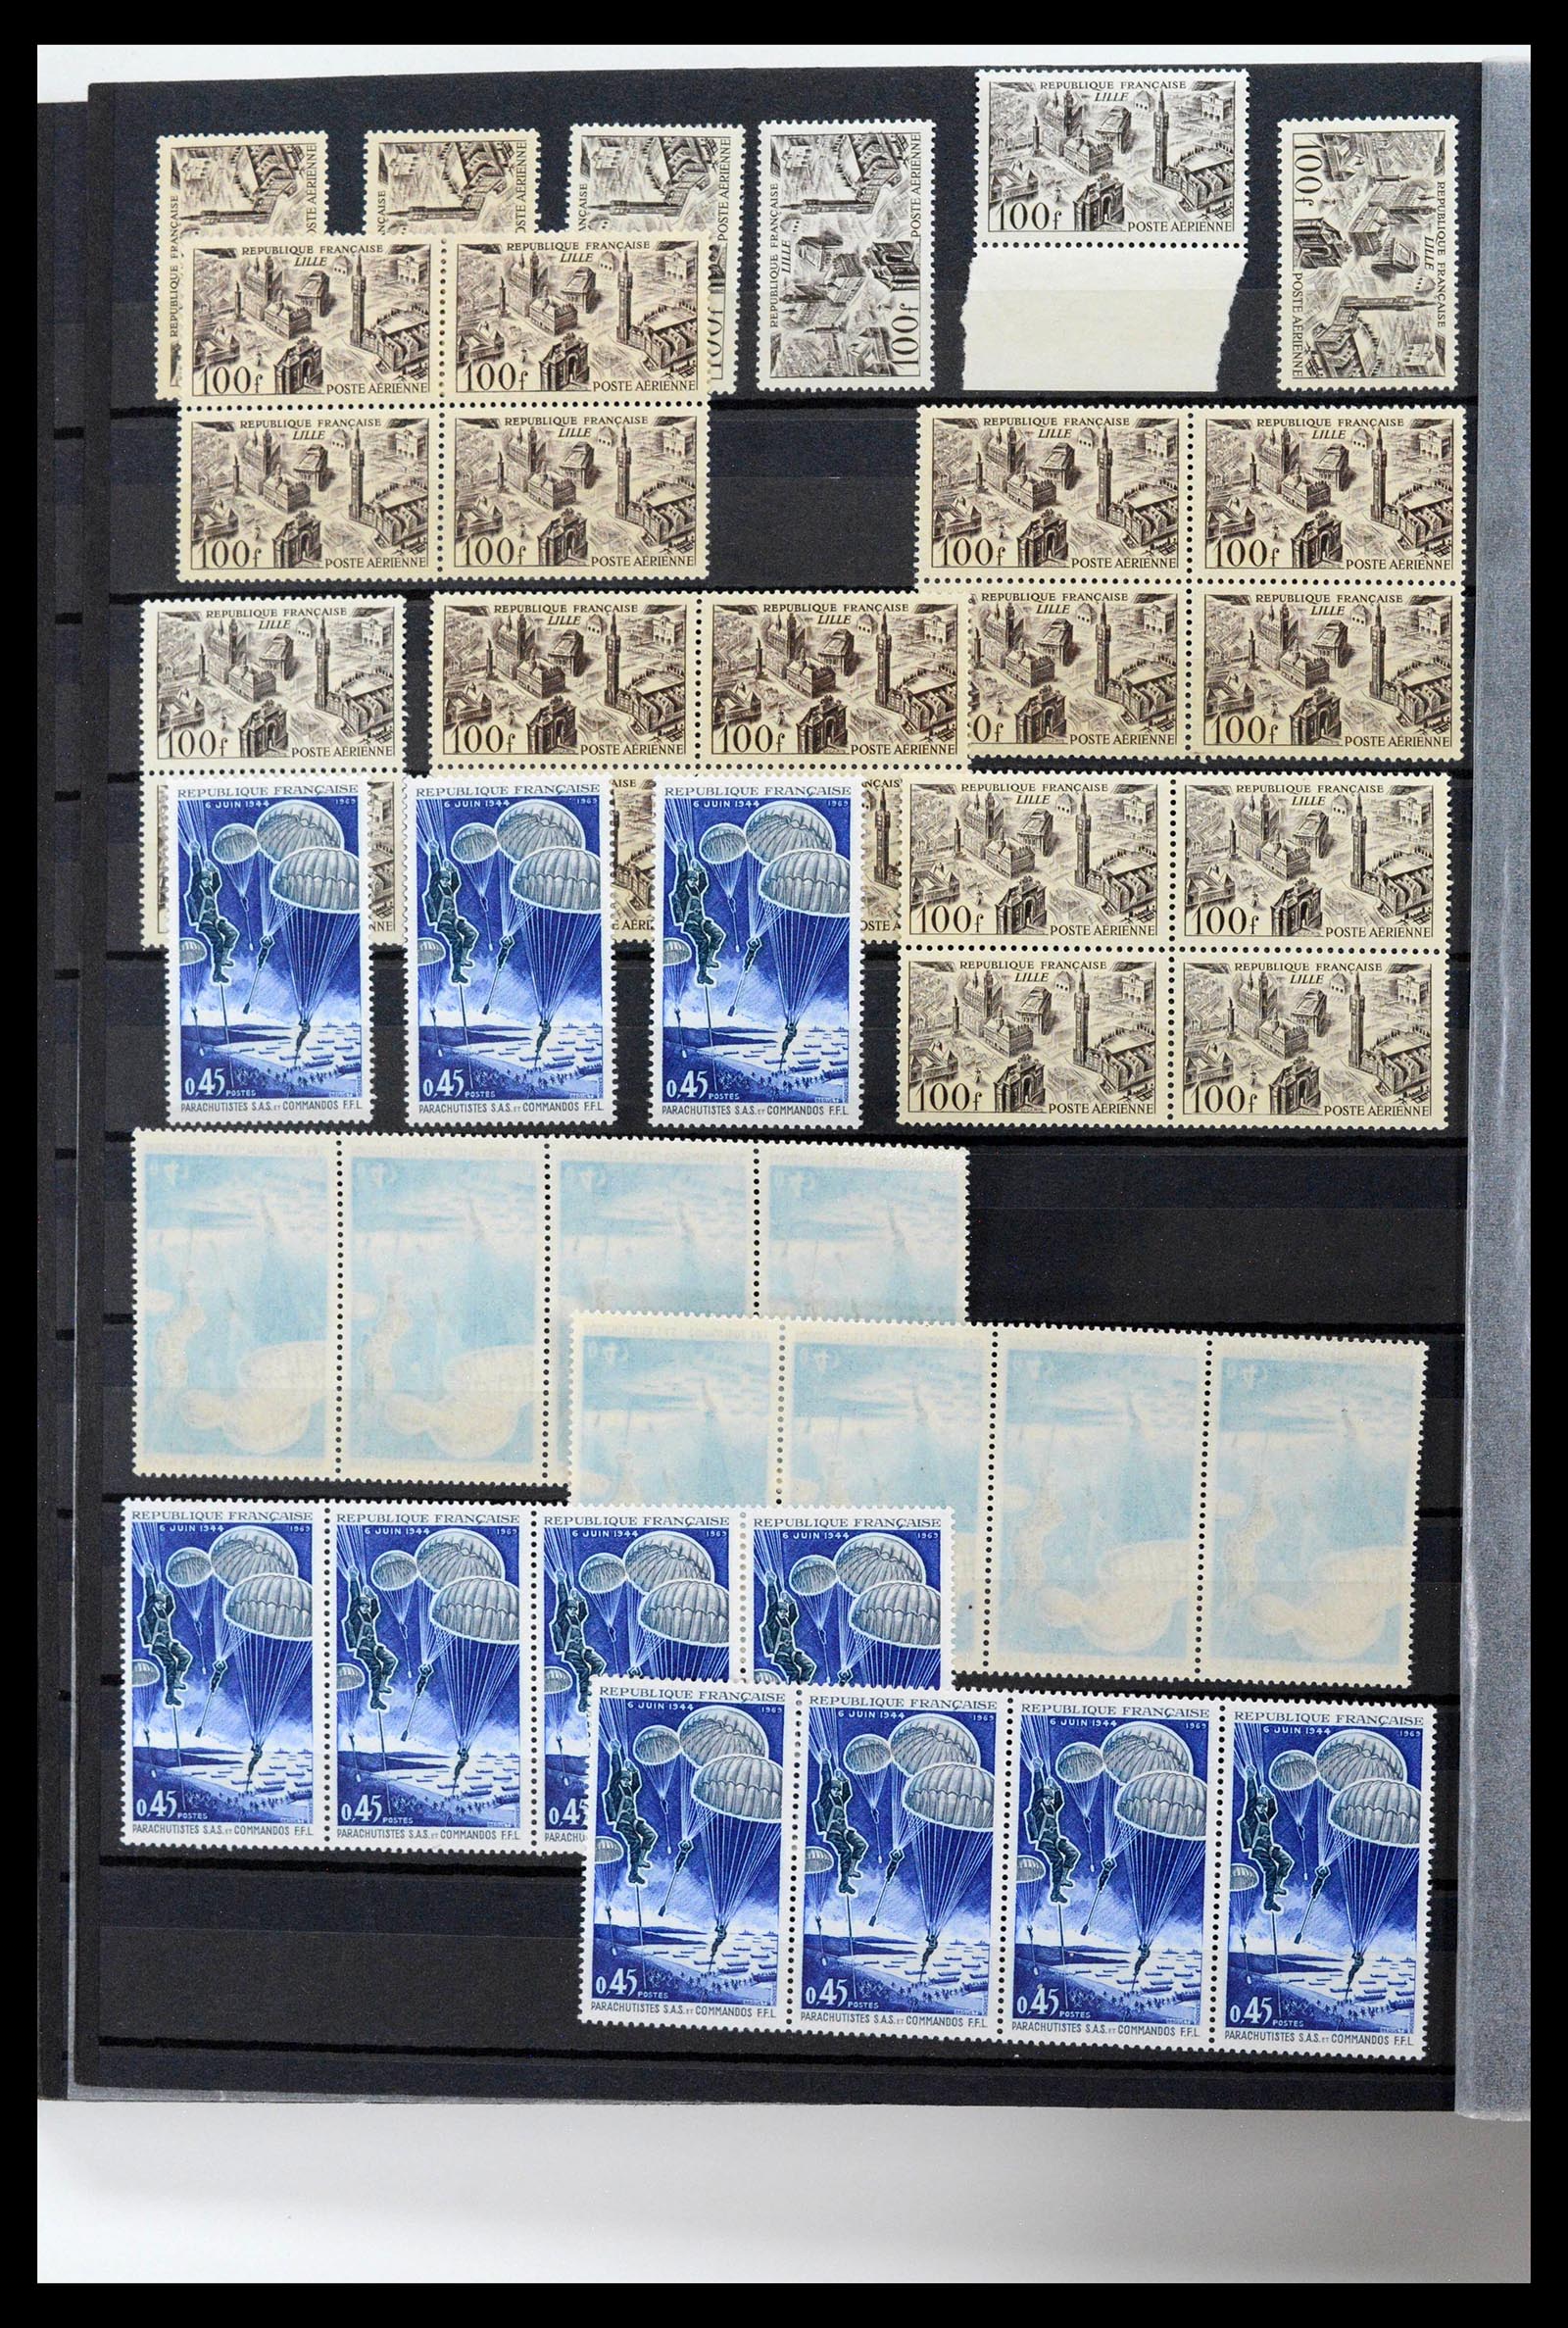 39423 0030 - Stamp collection 39423 France varieties 1862-1985.